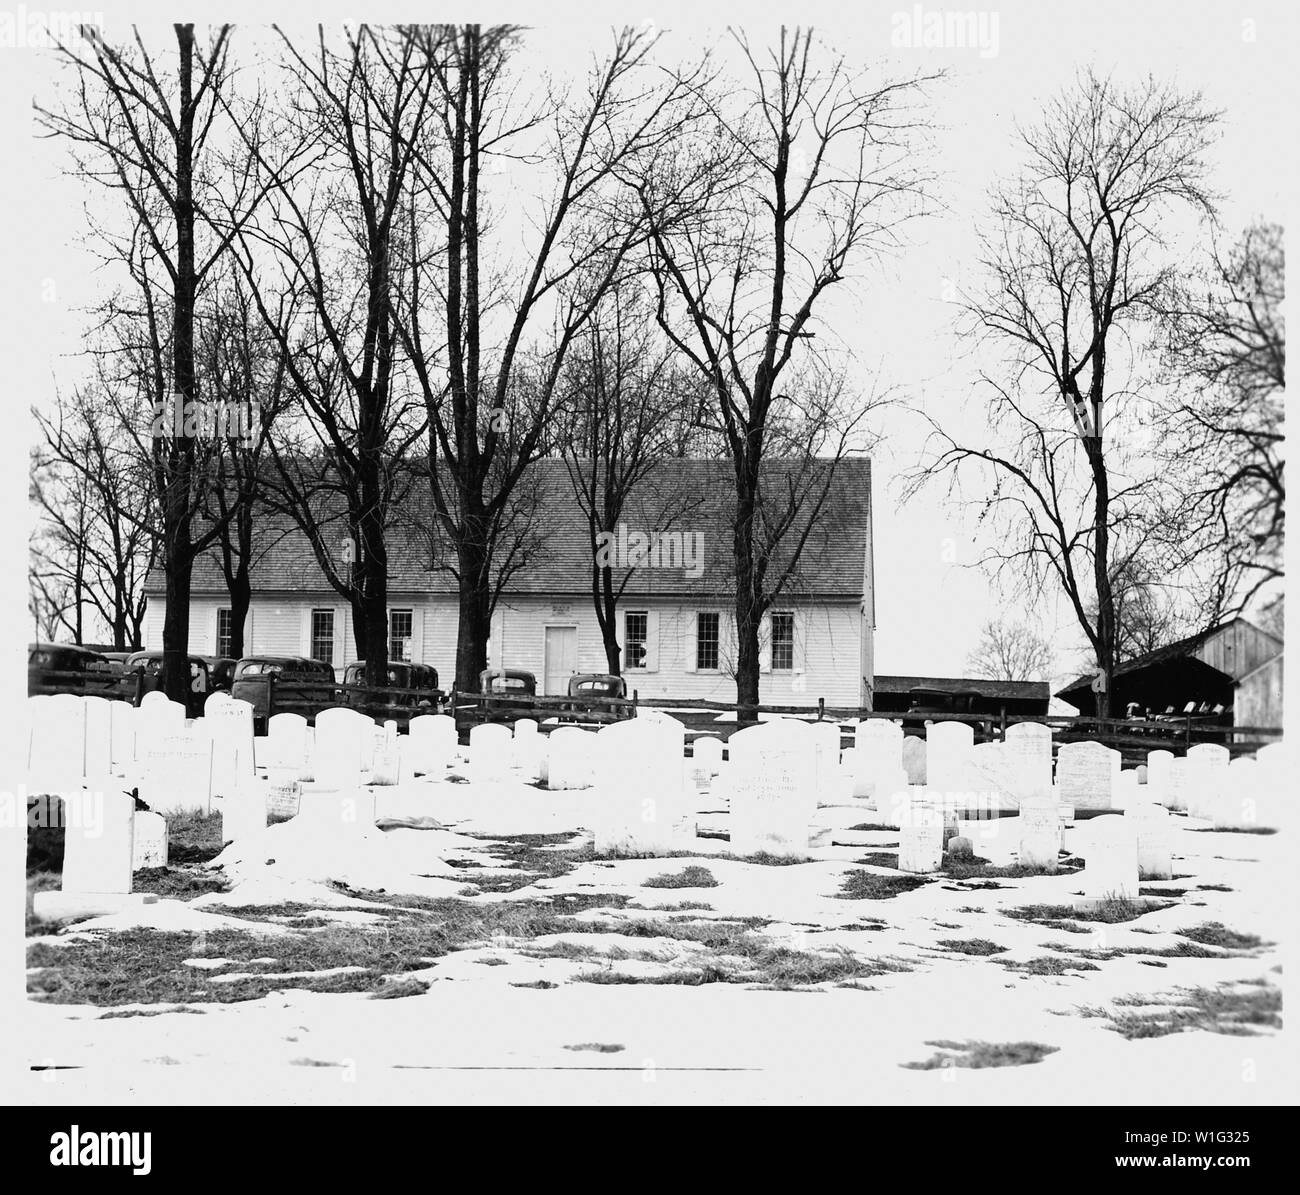 Lancaster County, Pennsylvania. Meeting house of the Weaverland Conference Mennonites near New Holl . . .; Scope and content:  Full caption reads as follows: Lancaster County, Pennsylvania. Meeting house of the Weaverland Conference Mennonites near New Holland. The auto-owning and autoless members worship in this meeting house on alternate Sundays. Like Quaker meeting houses, those of the Mennonites do not have steeples, colored windows, or any musical instruments within the building. Tombstones like those of the Amish, must bear a simple inscription Stock Photo